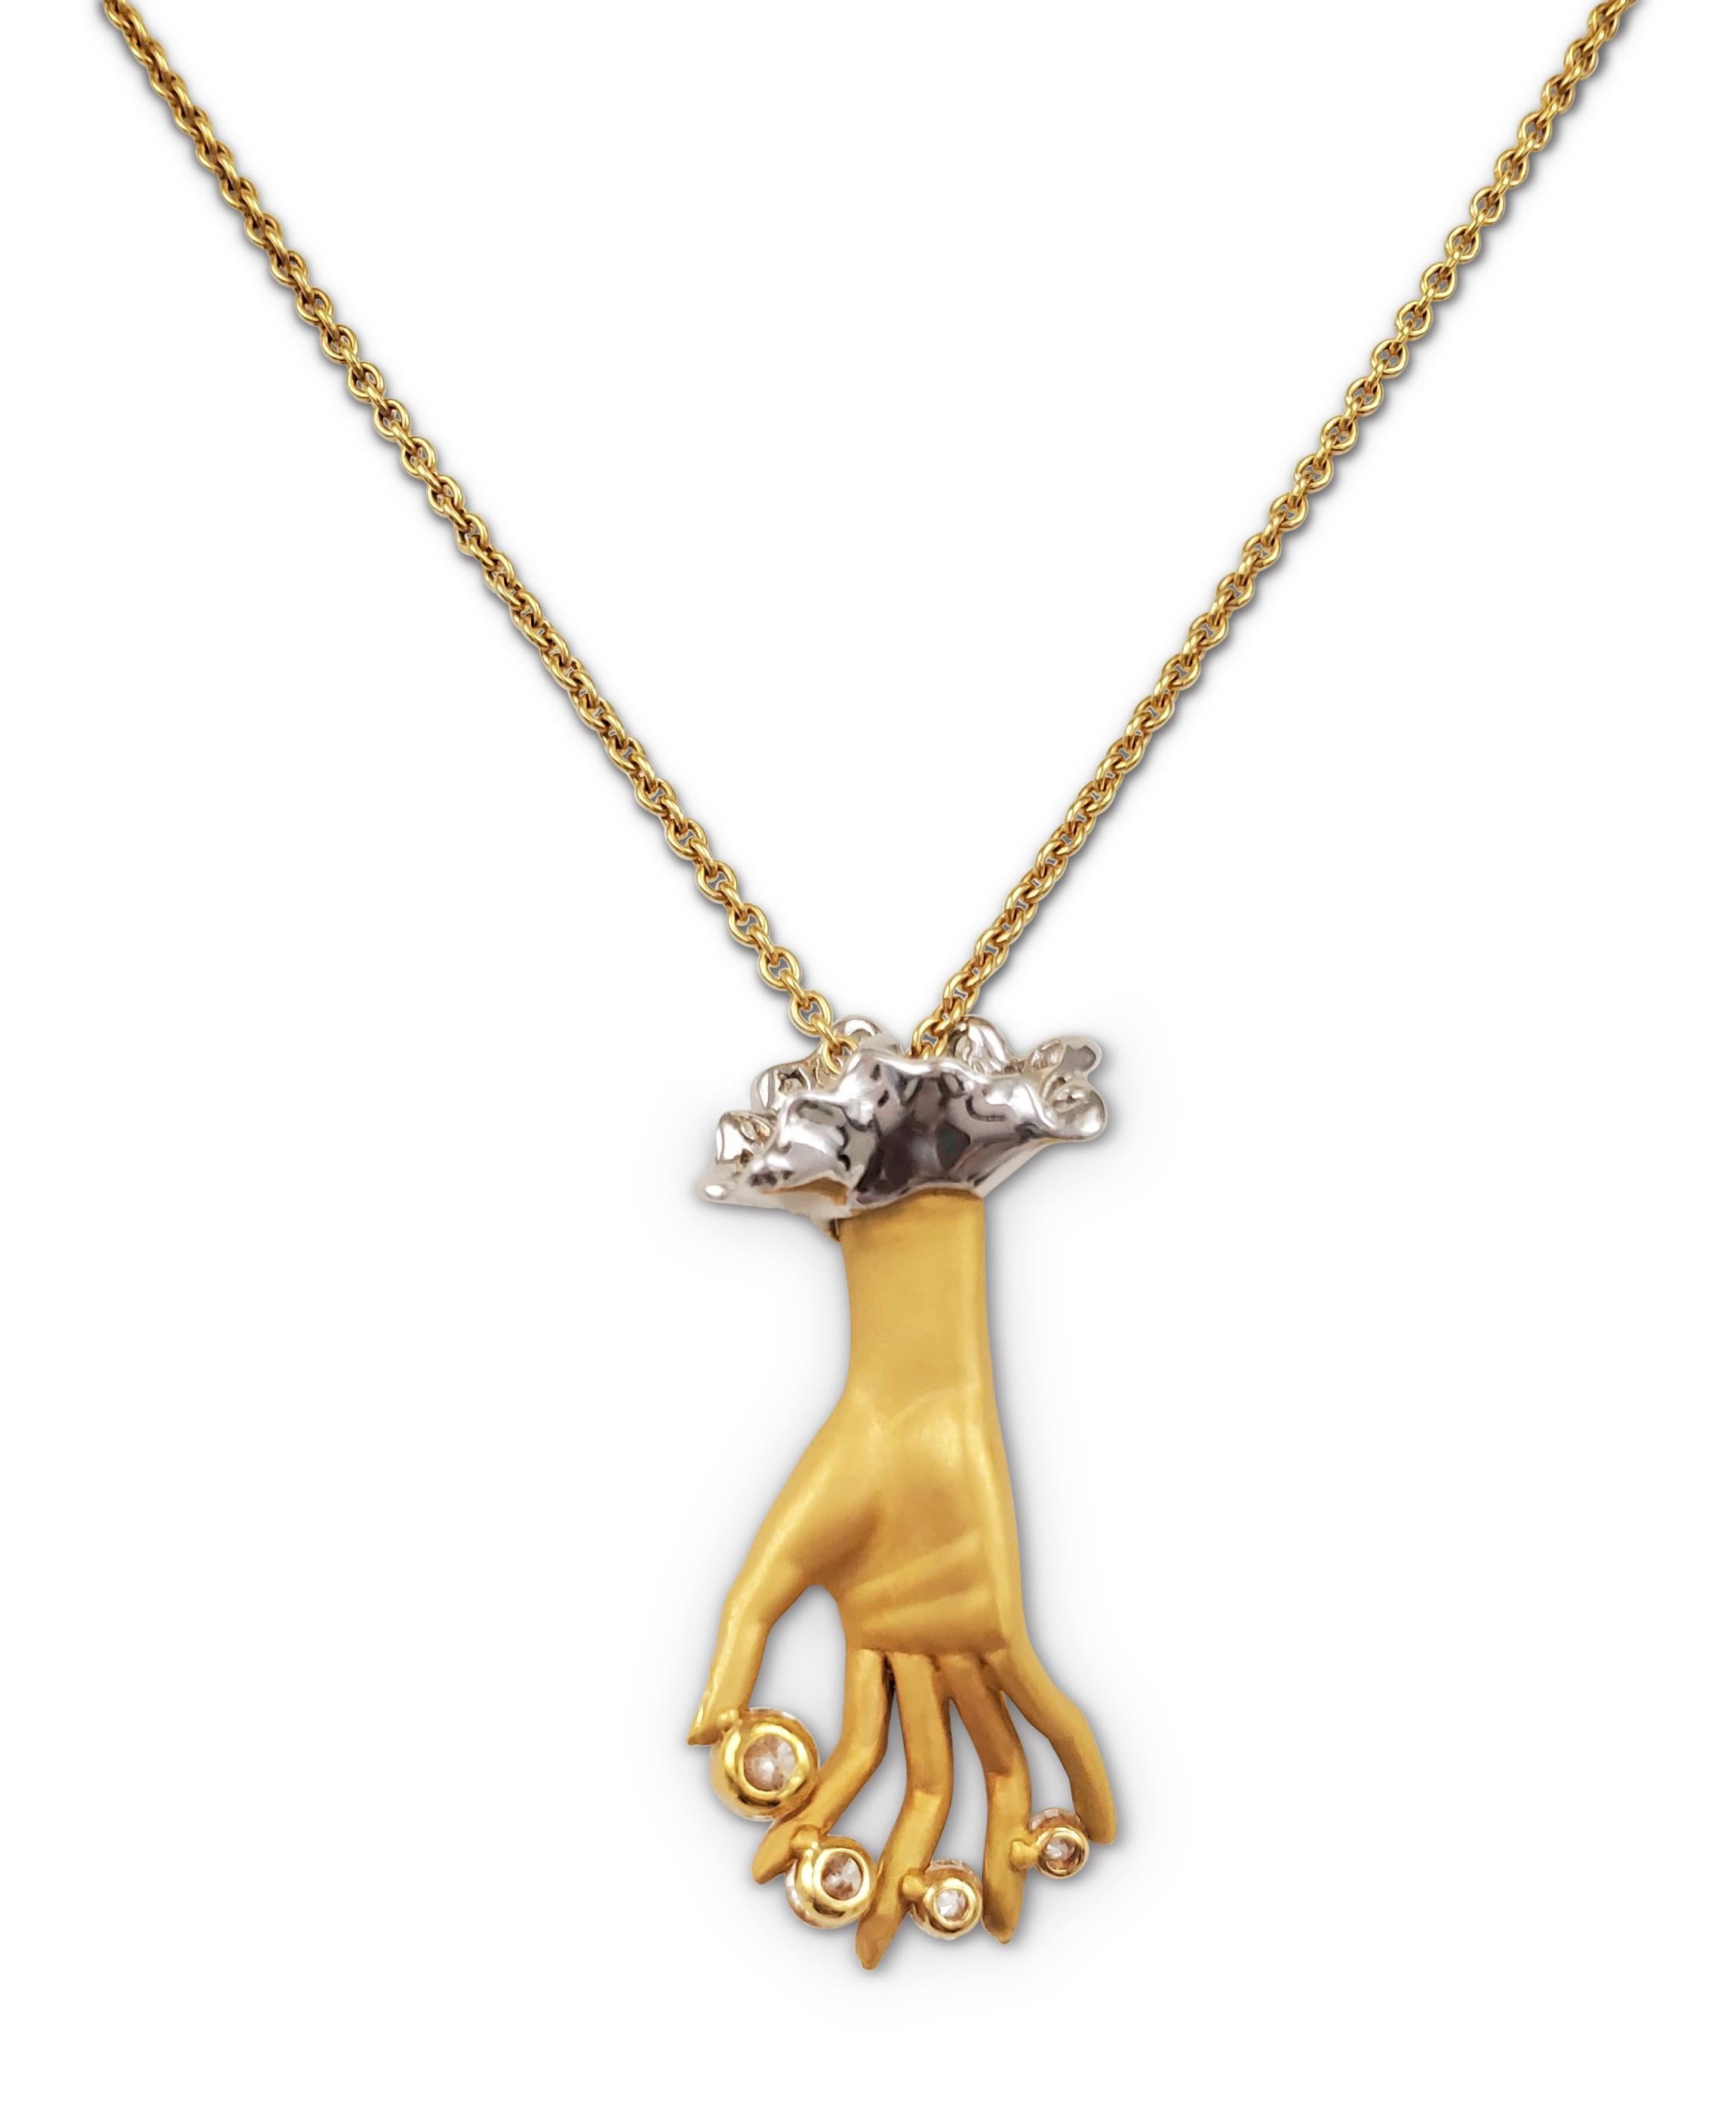 Authentic Carrera y Carrera 'Las Manos' pendant designed as a hand accented with round brilliant cut diamonds weighing an estimated 0.95 carats (E-F color, VS clarity). The pendant hangs from an 18 karat yellow gold chain that measures 16 inches in